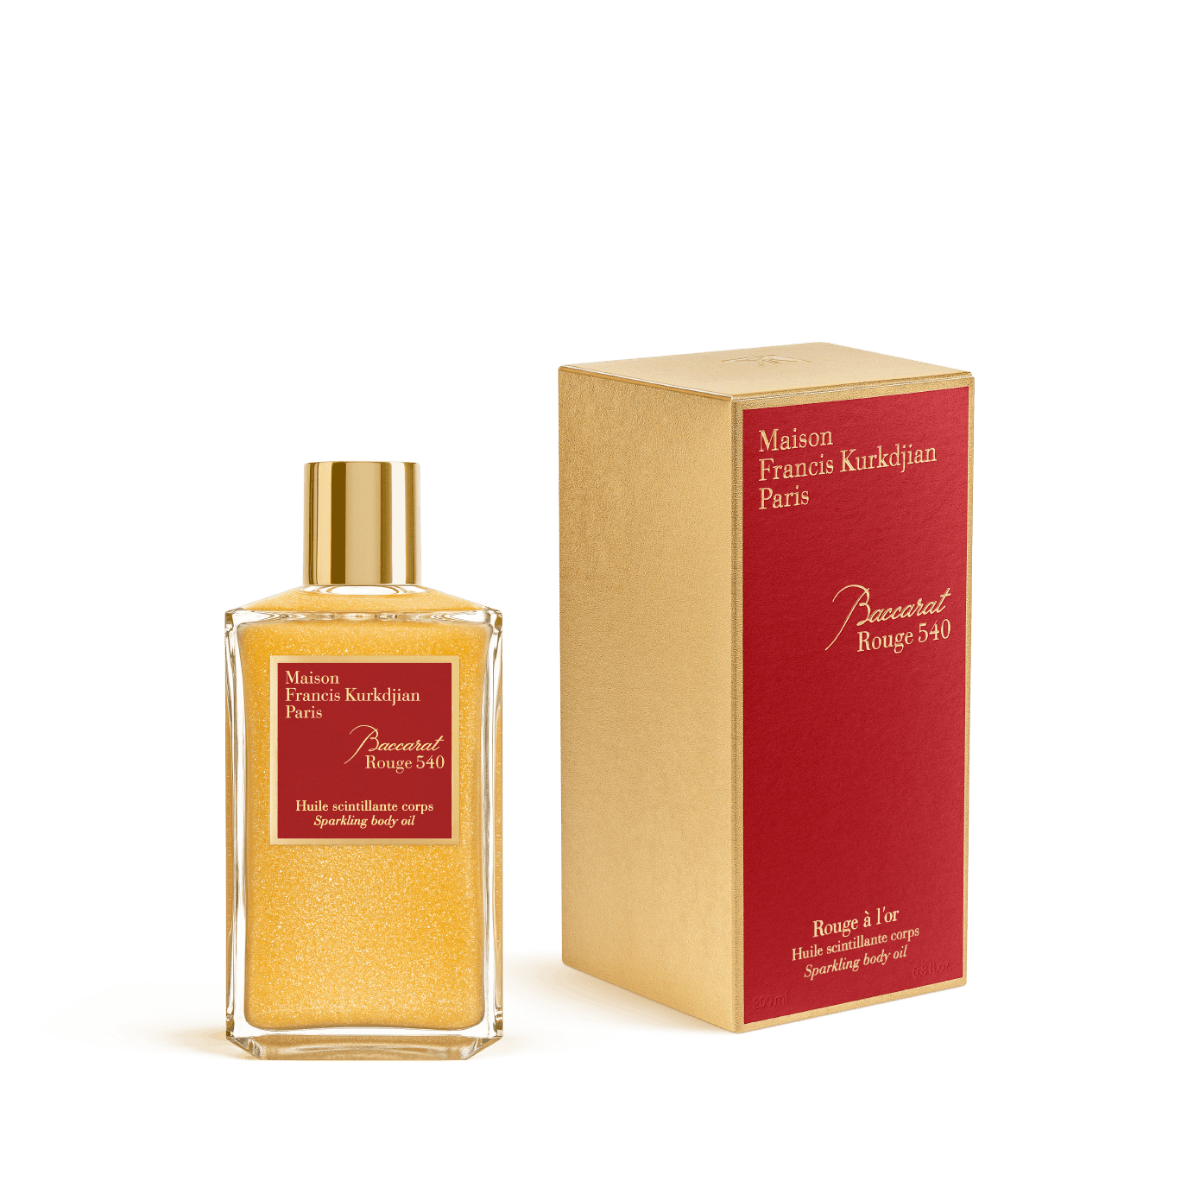 Image of Baccarat Rouge 540  sparkling body oil by the perfume brand Maison Francis Kurkdjian